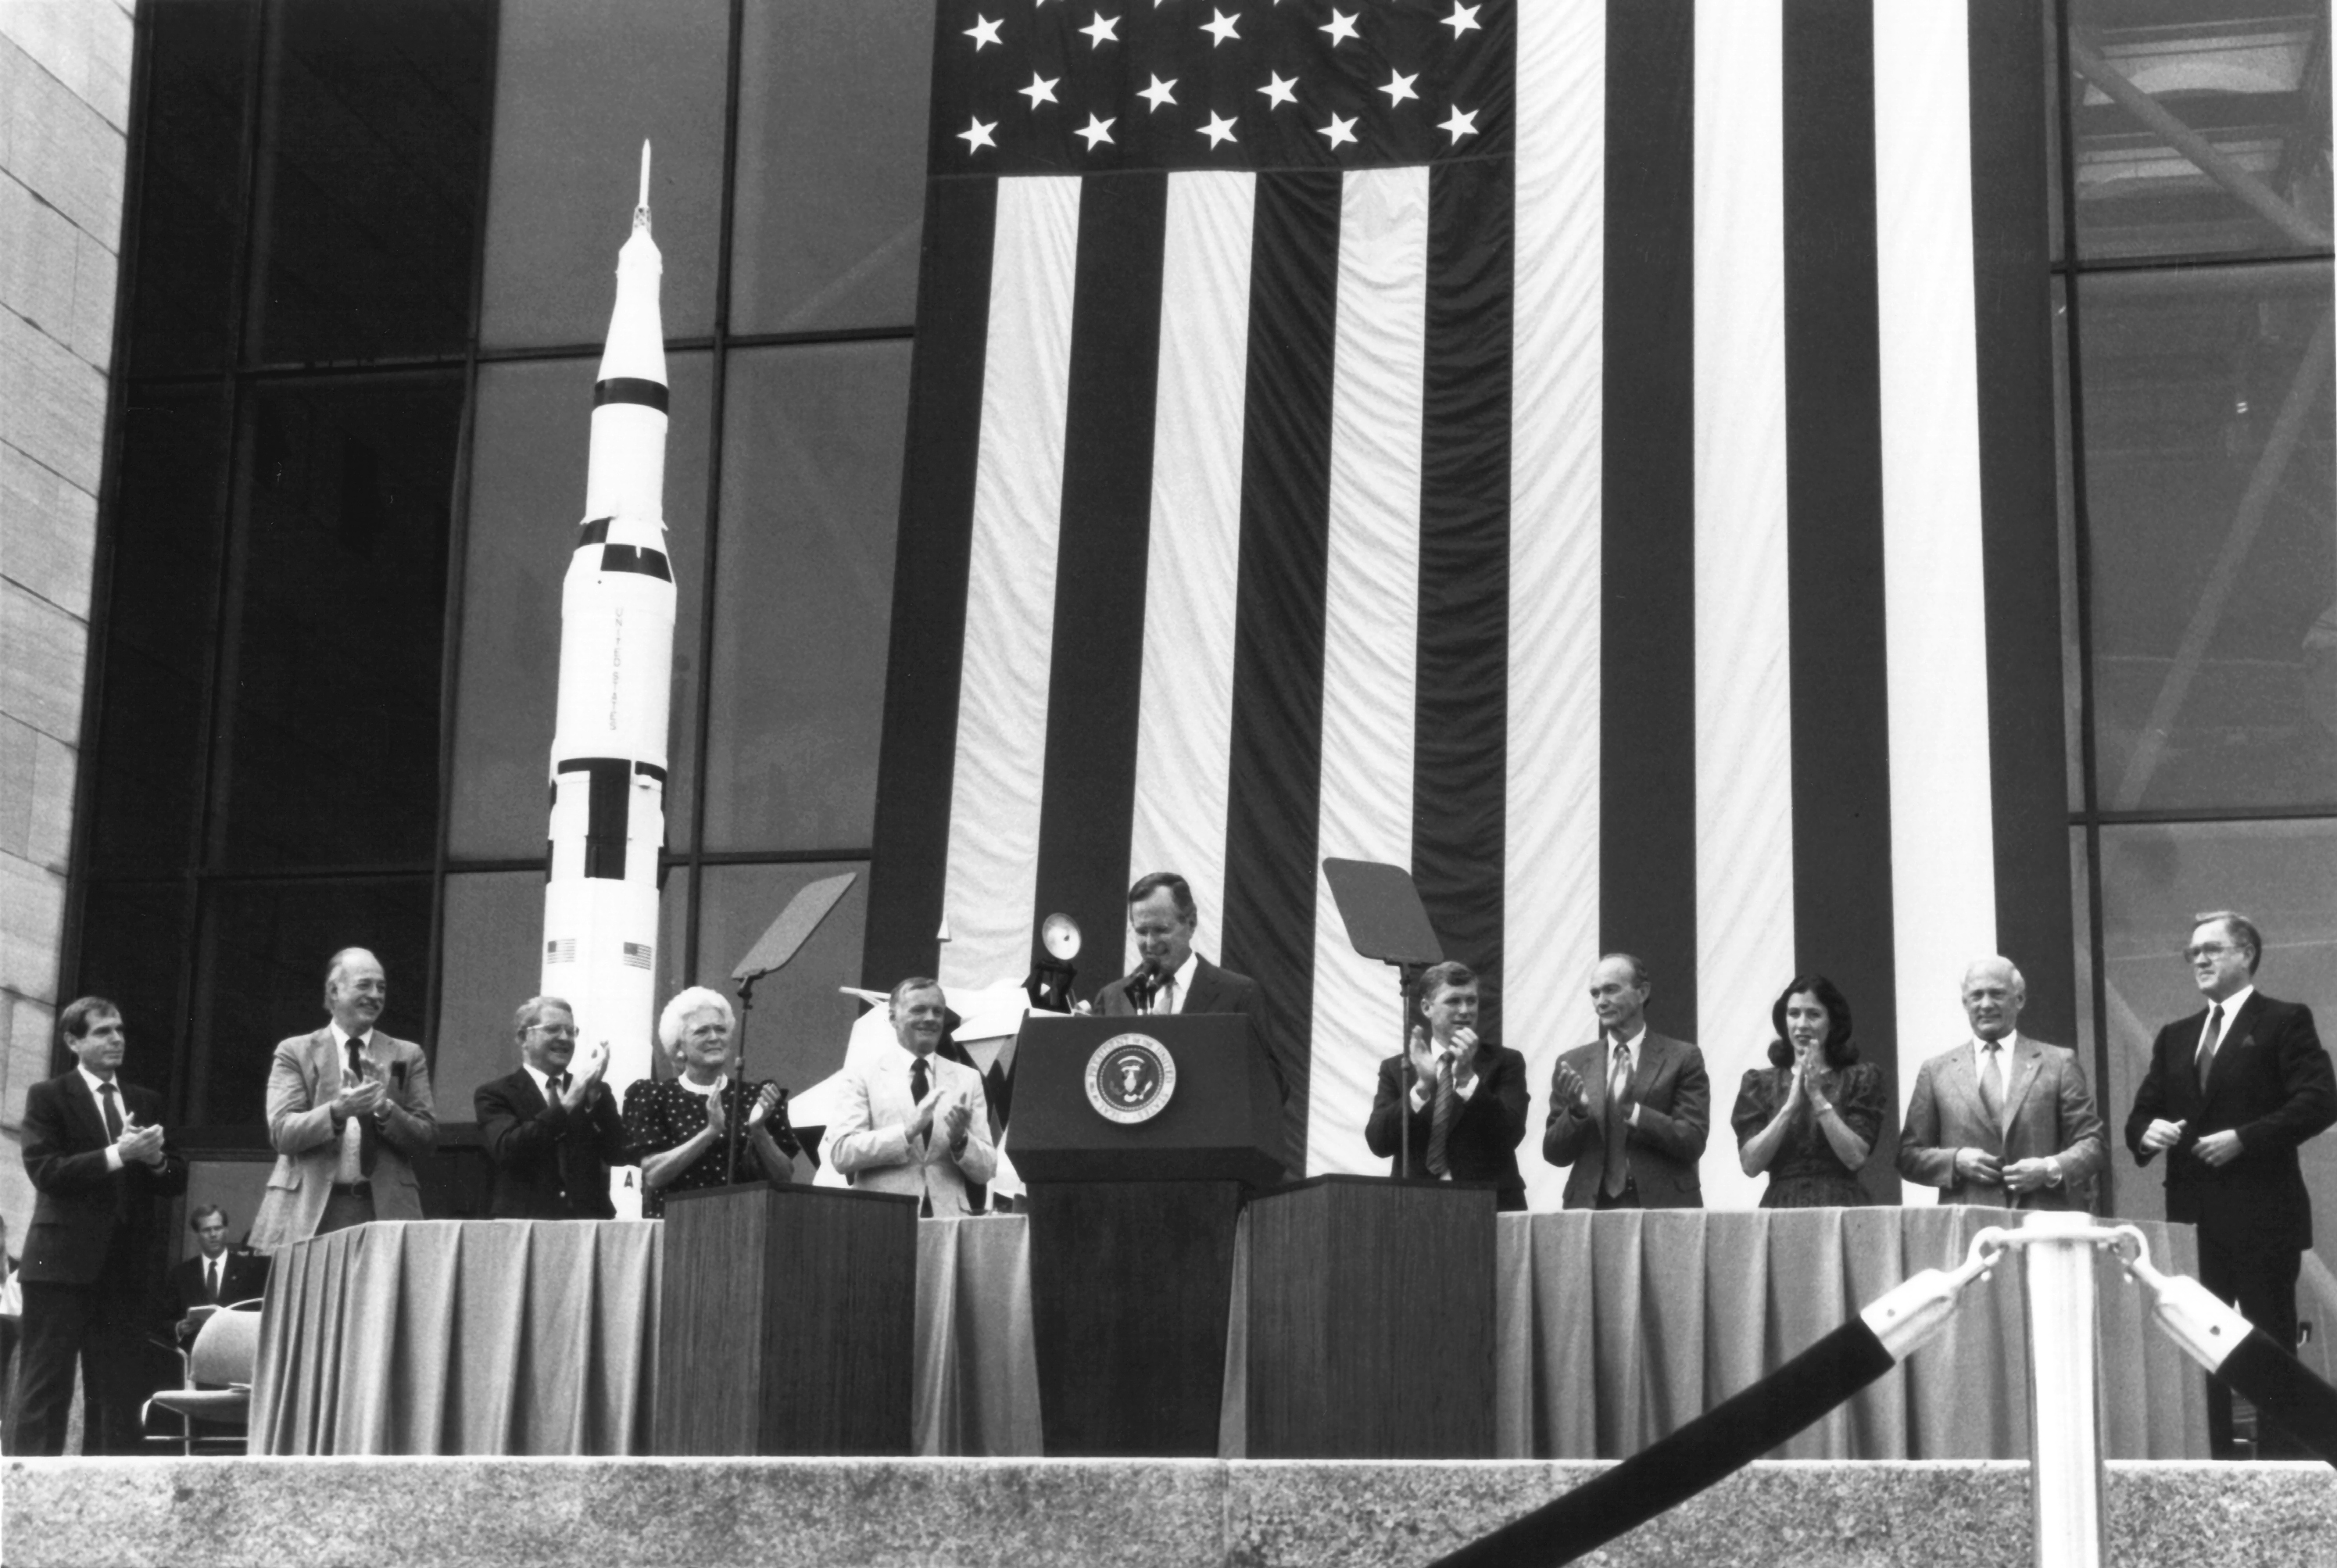 In 1989, President George H. W. Bush announced his Space Exploration Initiative.